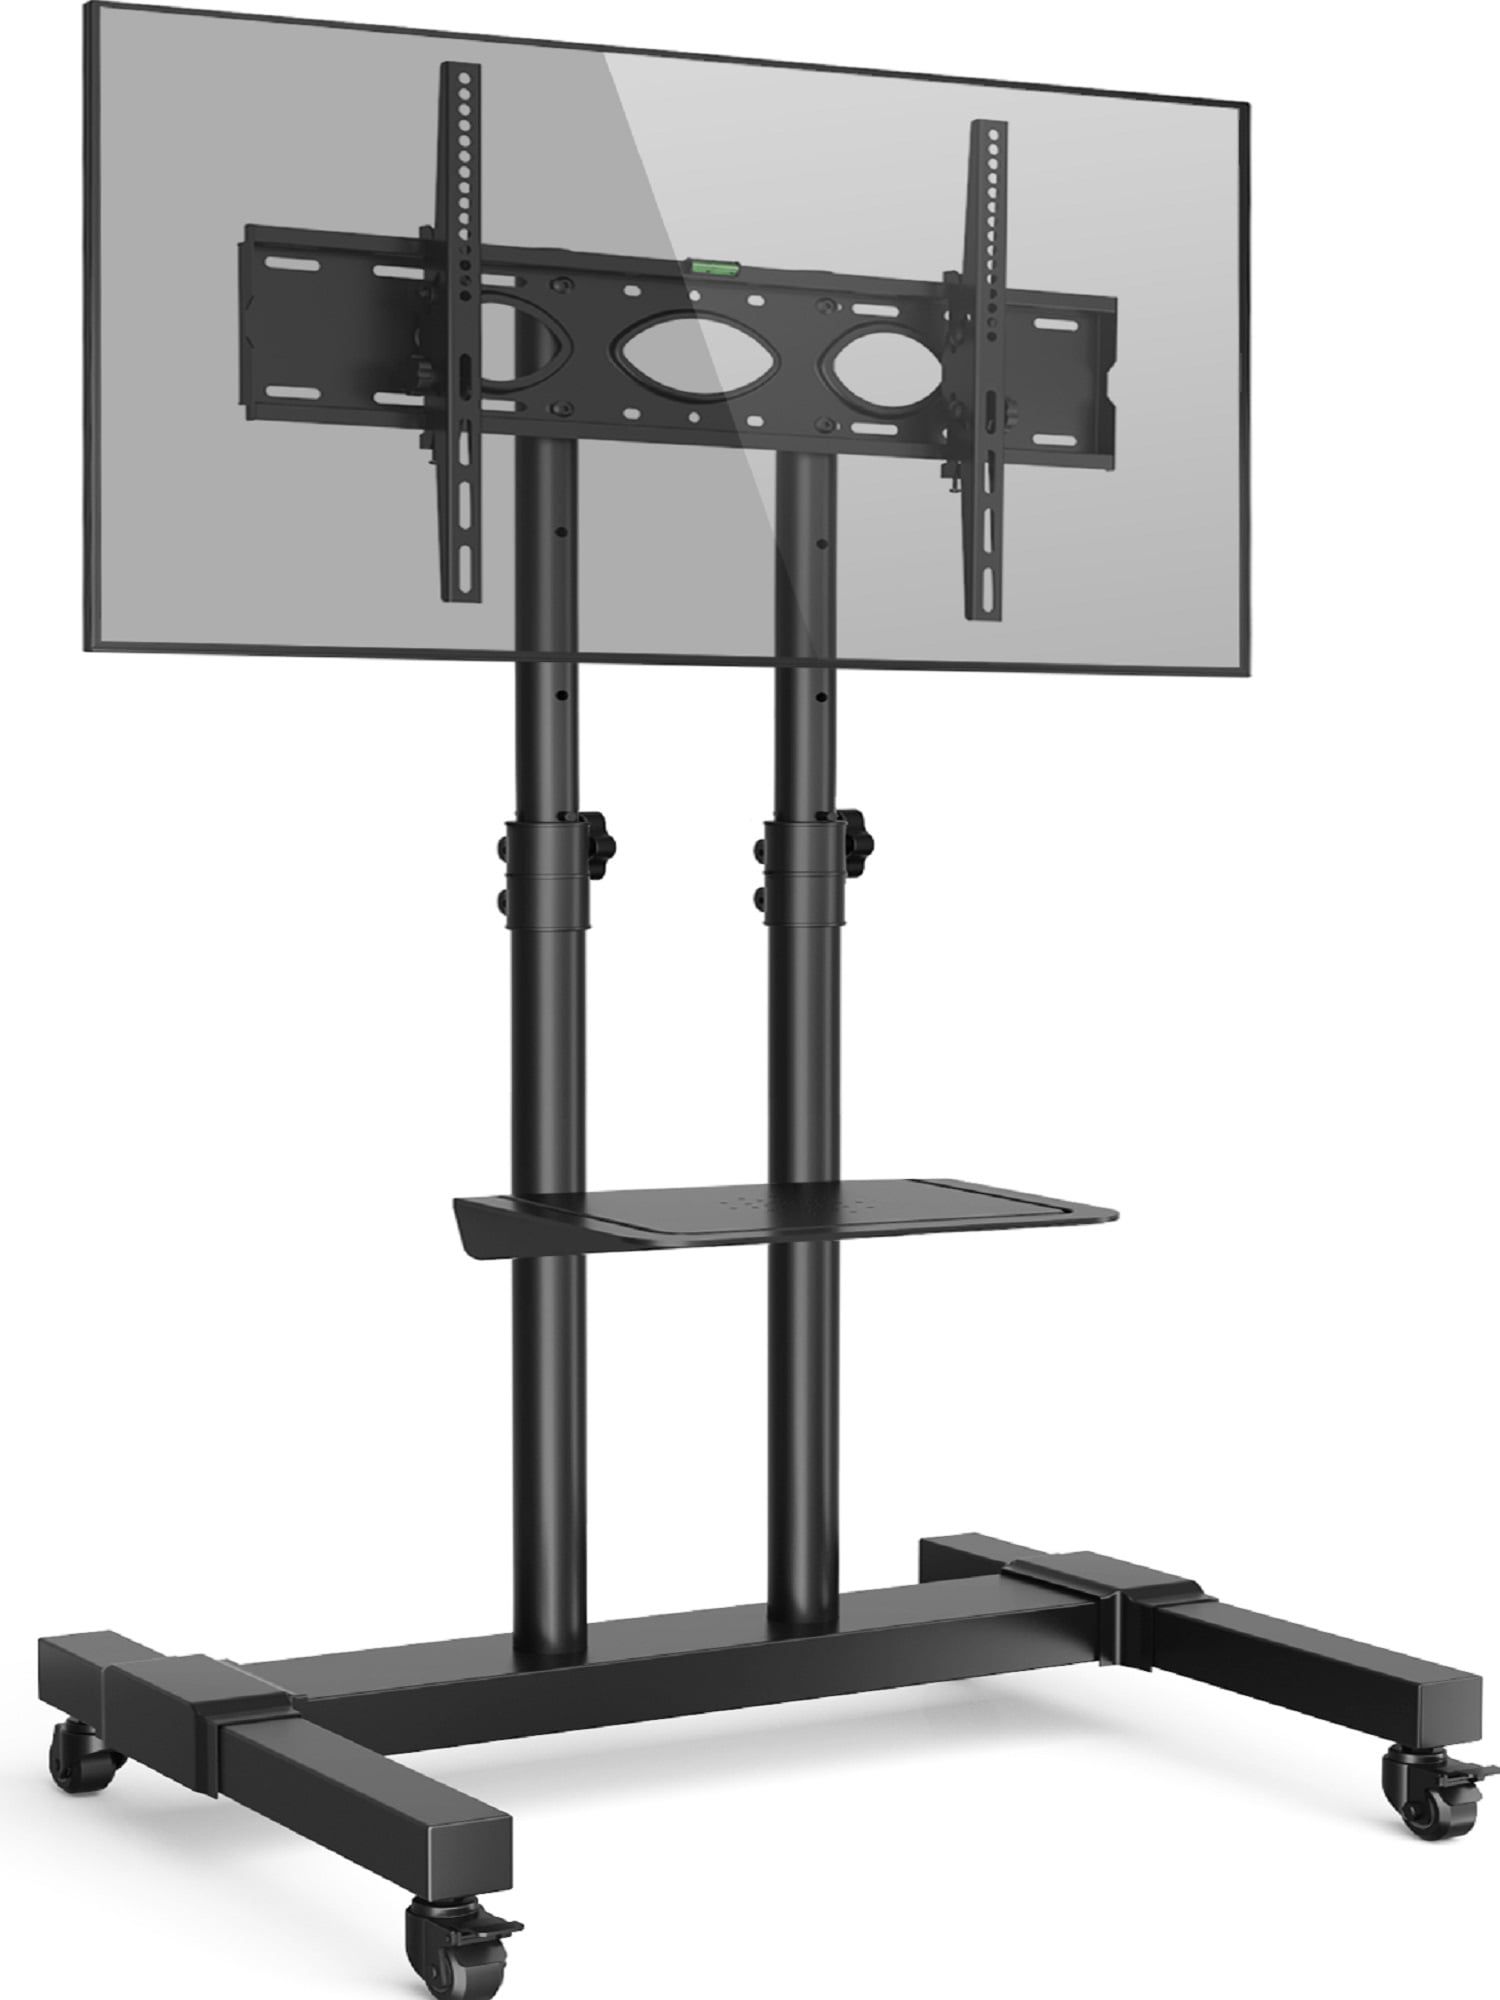 Tall Rolling Tv Stand With Wheels For 32 To 85 Inch Flat Panel Tvs Tilt,  Black Mobile Tv Cart – Walmart With Regard To Mobile Tilt Rolling Tv Stands (View 15 of 15)